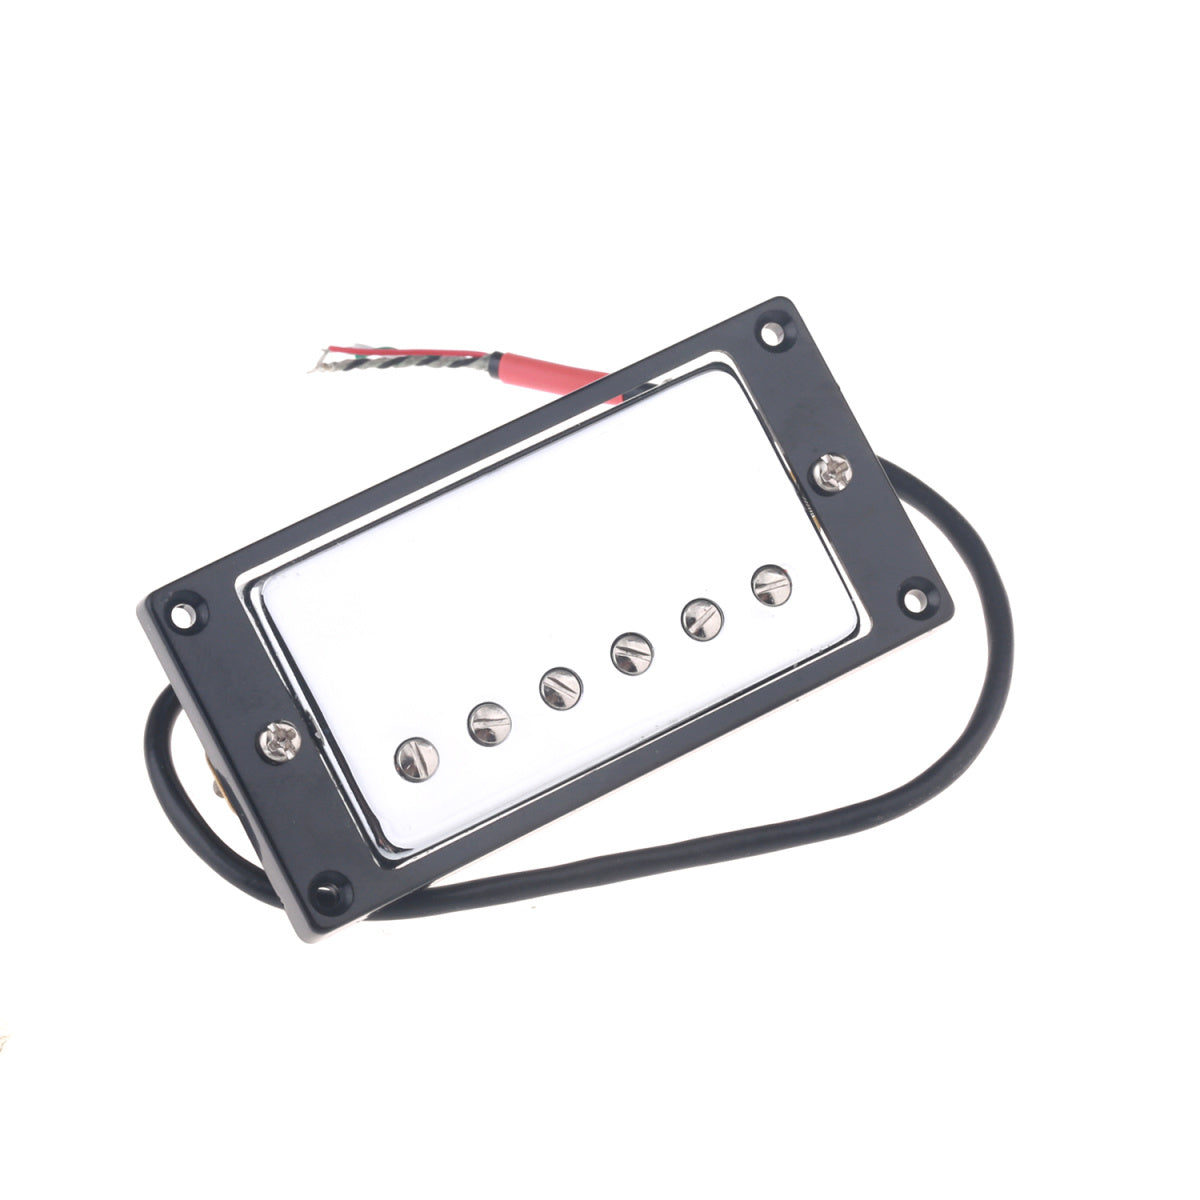 Musiclily 50mm Humbucker Pickup for Les Paul Style Guitar Neck,Chrome